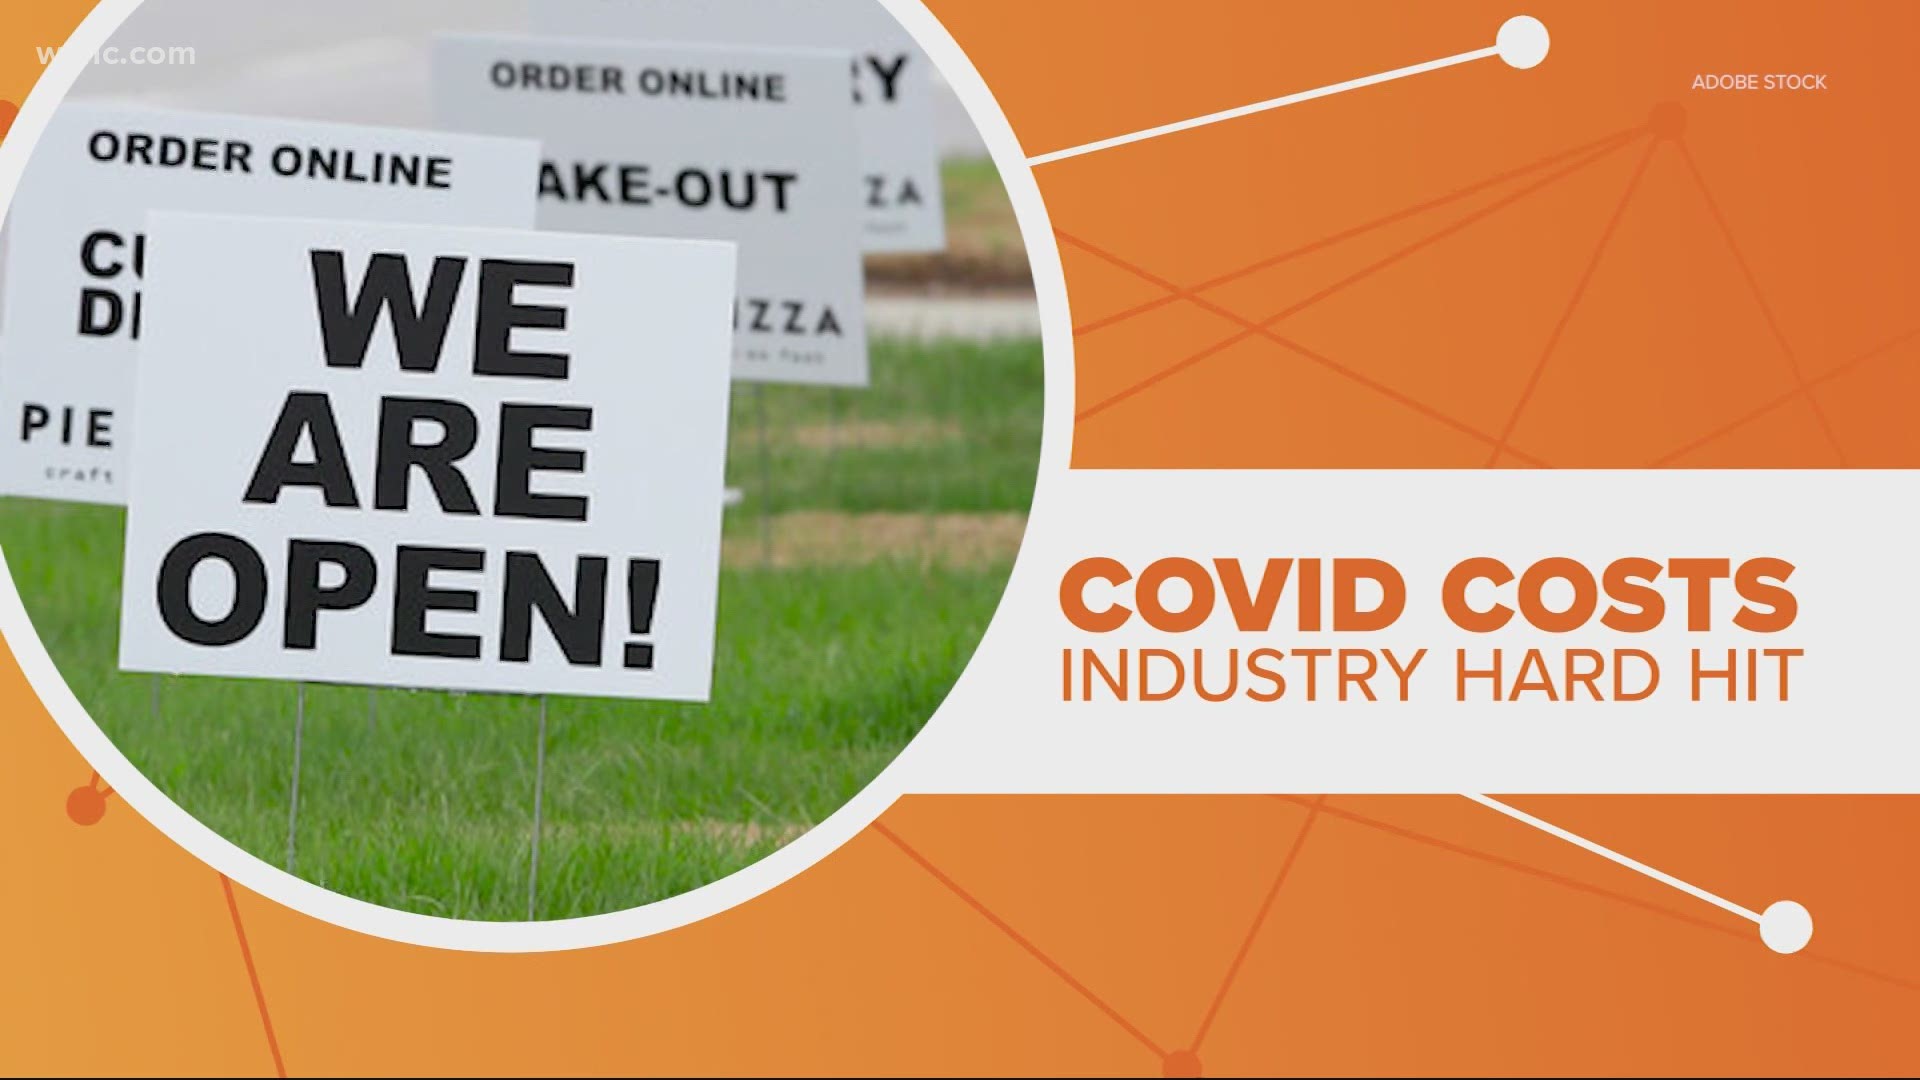 As COVID-19 restrictions are lifted, many people are heading back to their favorite businesses. And they might be getting a bigger boost than you might think.